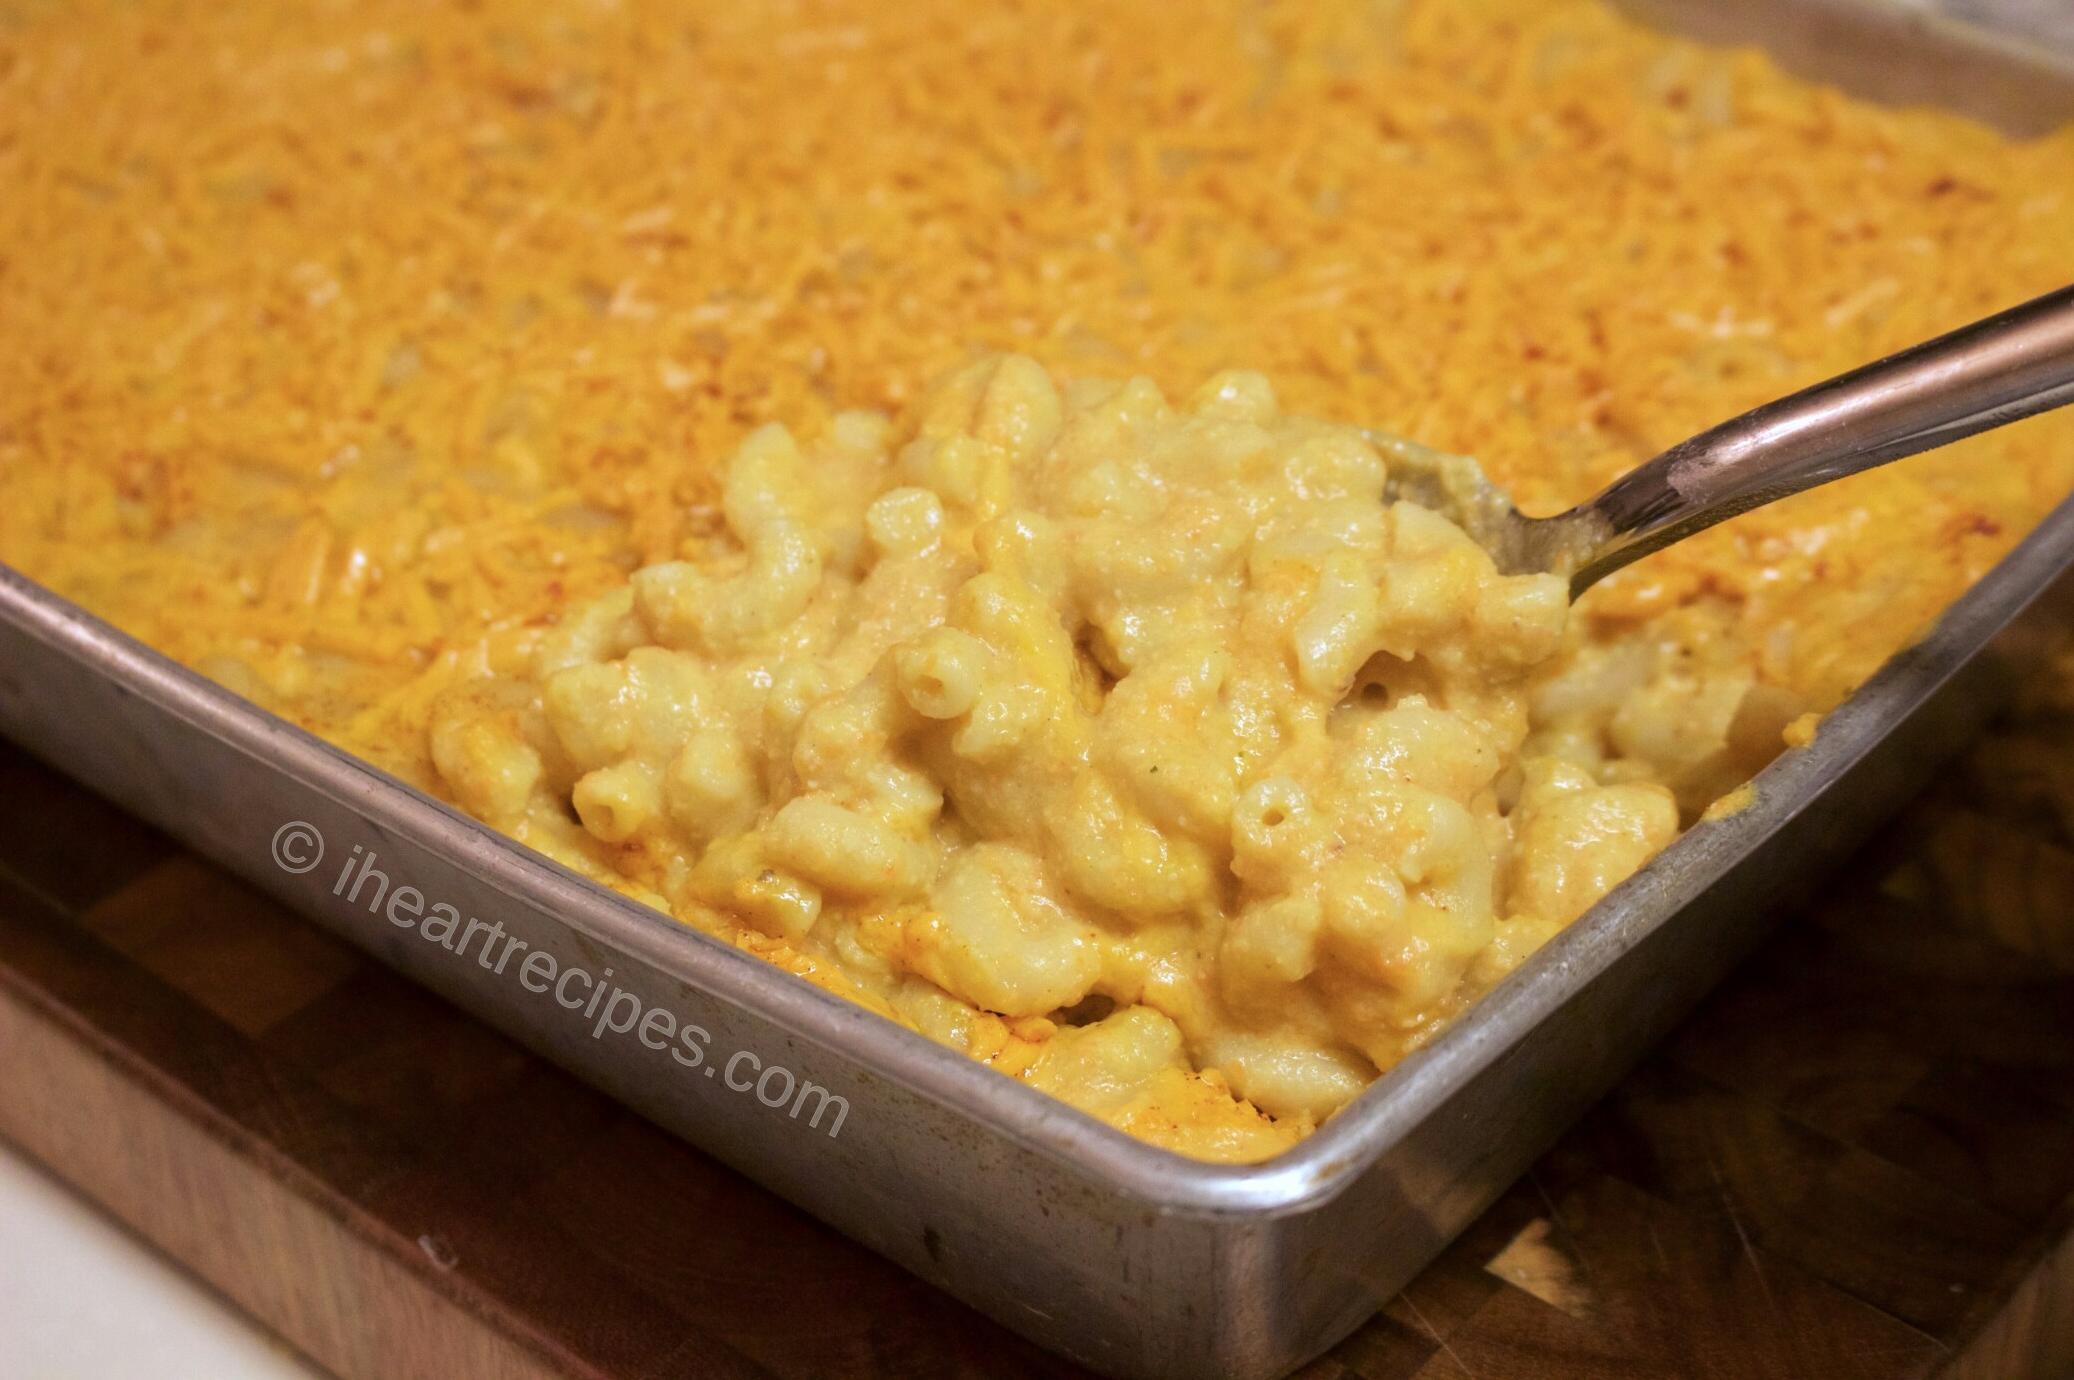  Who needs a comfort food? This vegan mac'n'cheese is yours now!